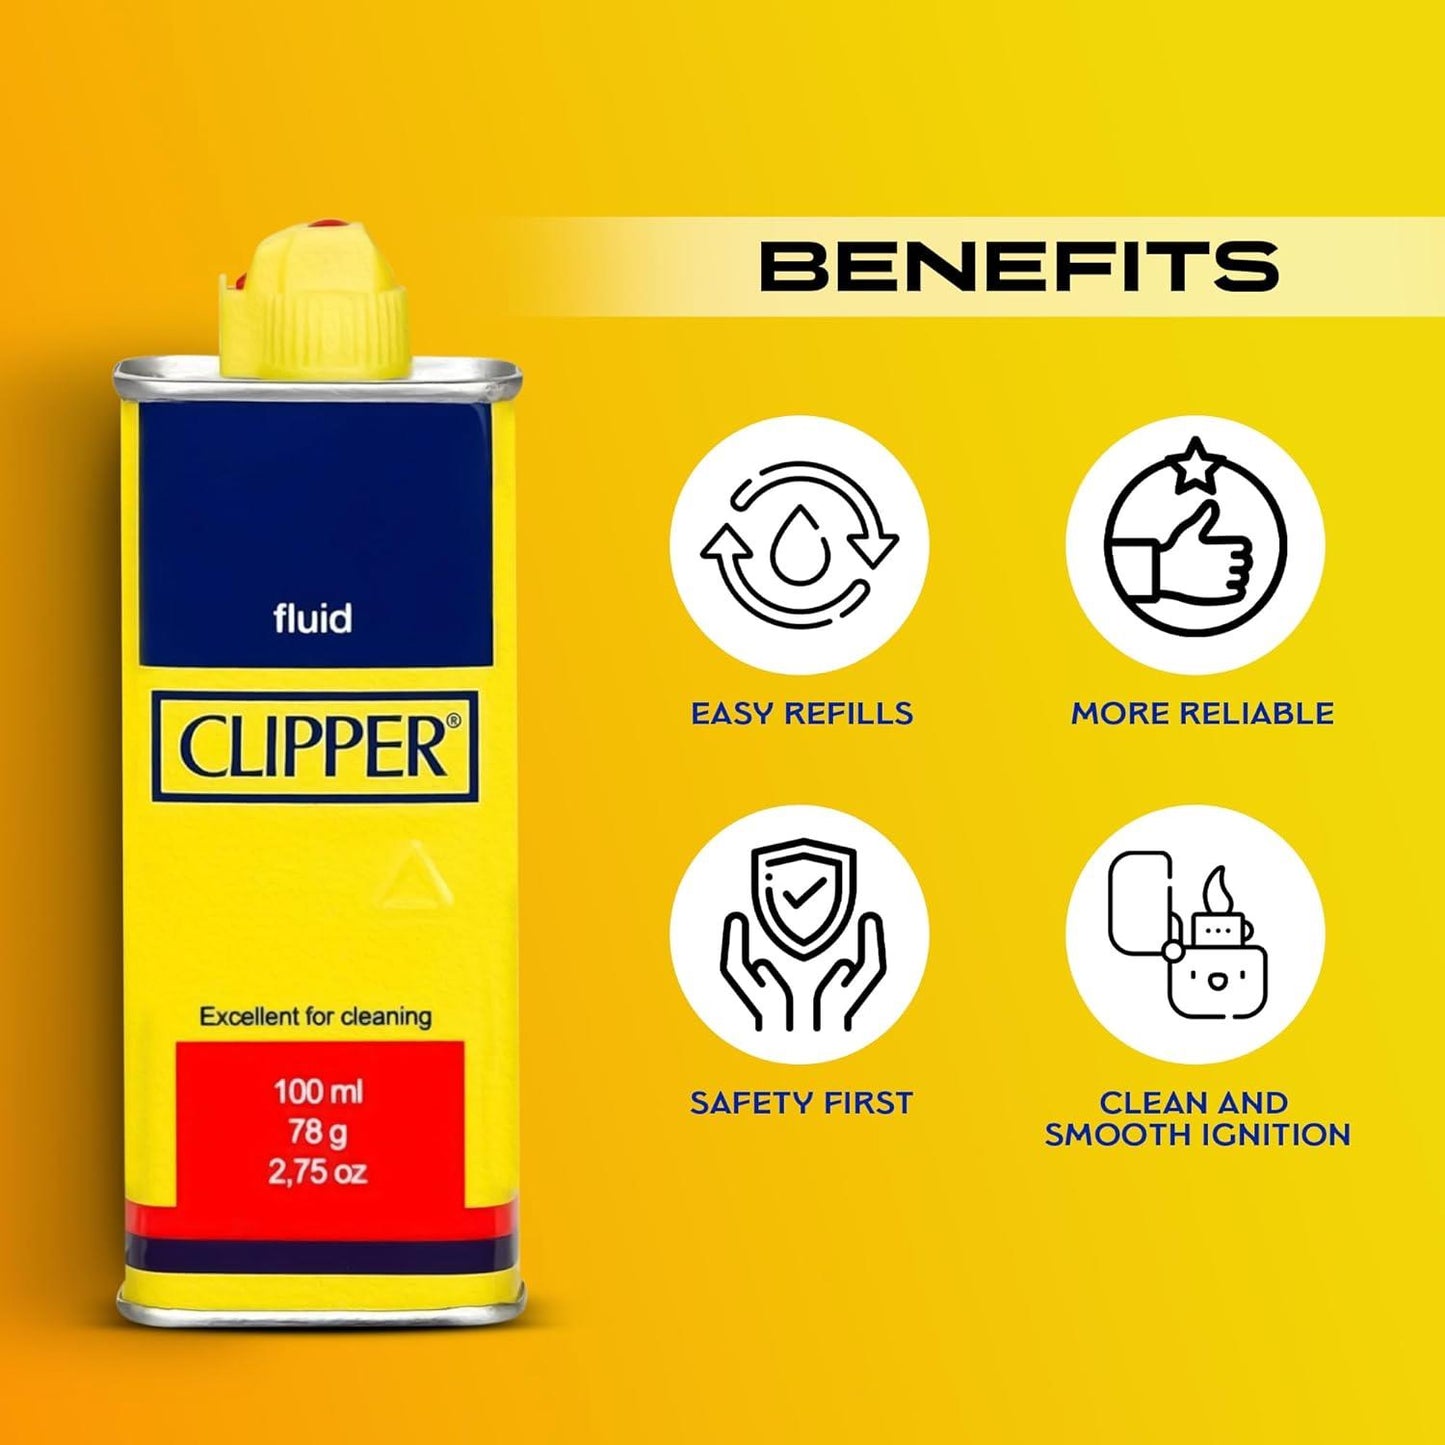 2 x Clipper 100ml Lighter Fluid - Long-Lasting, Clean Burning Fuel for Everyday Use